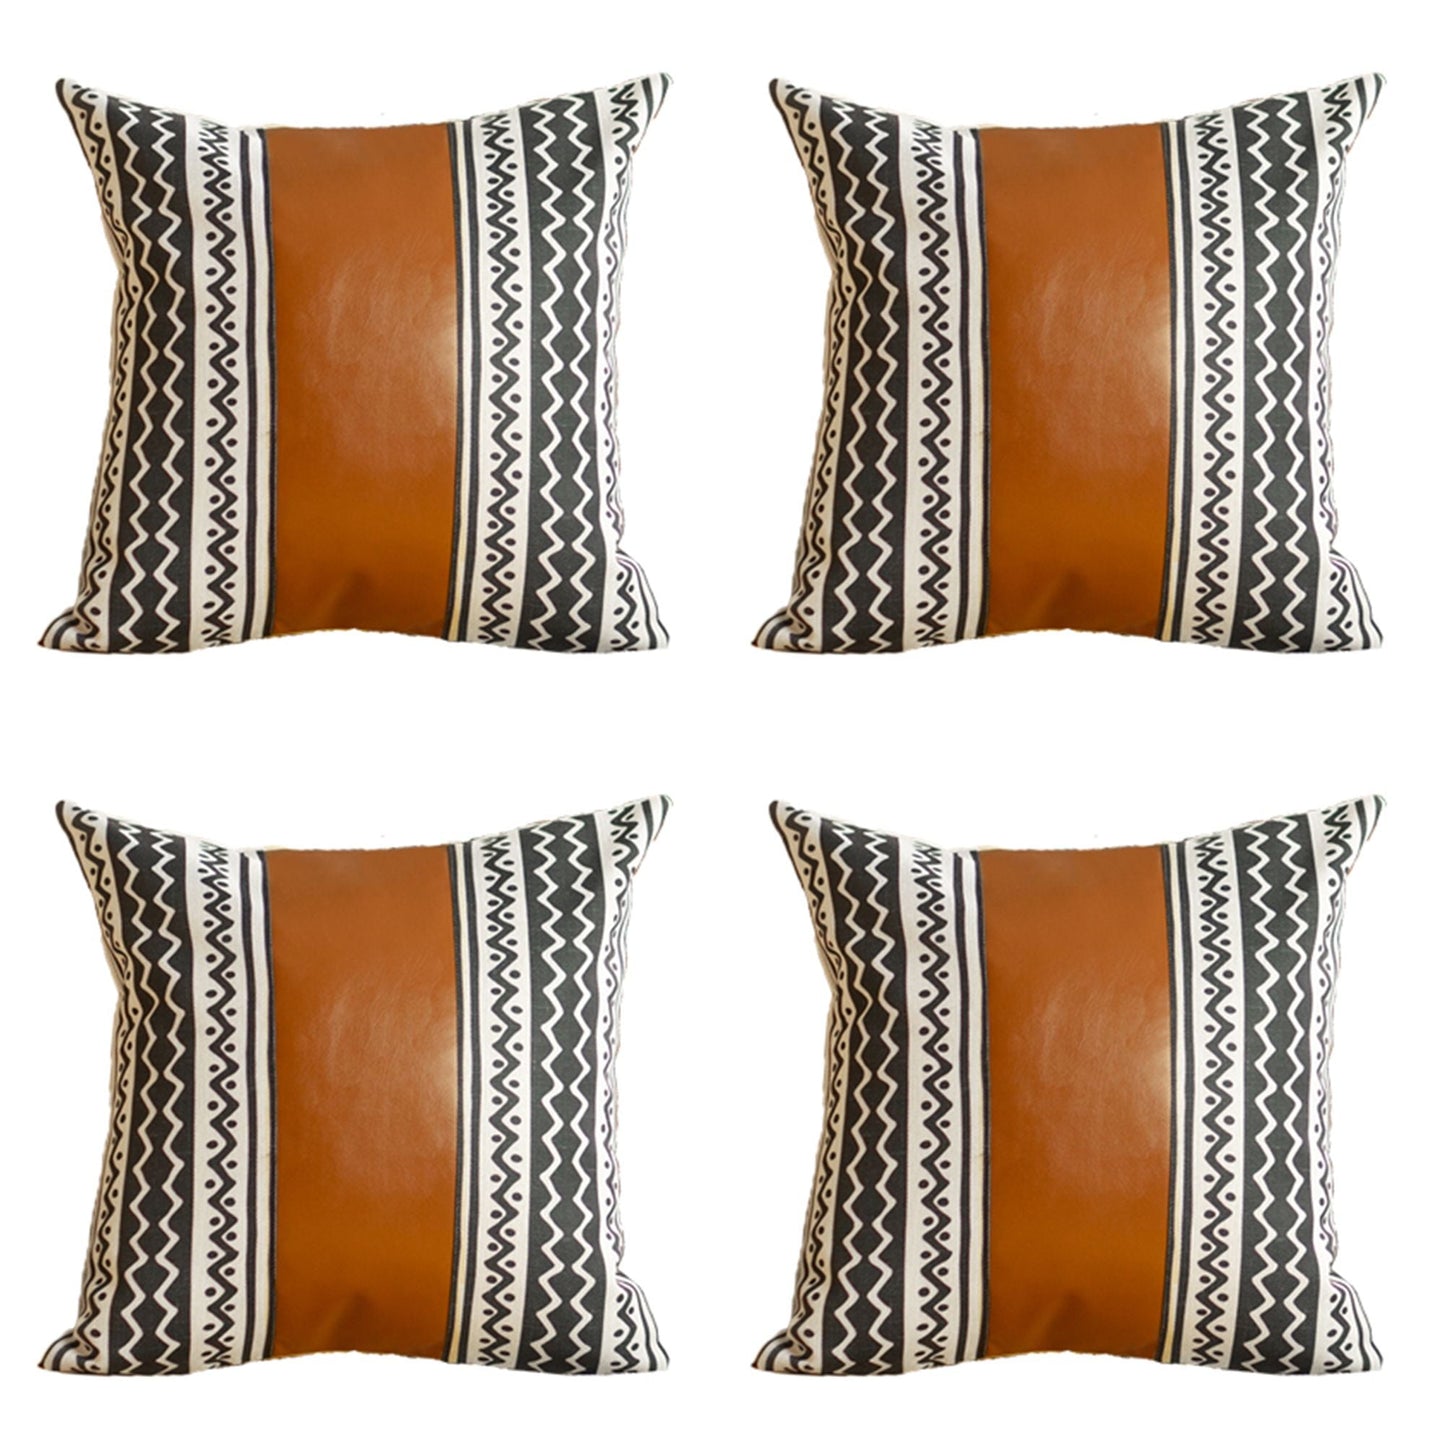 Vegan Faux Leather Handcrafted Decorative Throw Pillow Cover (Geometric)